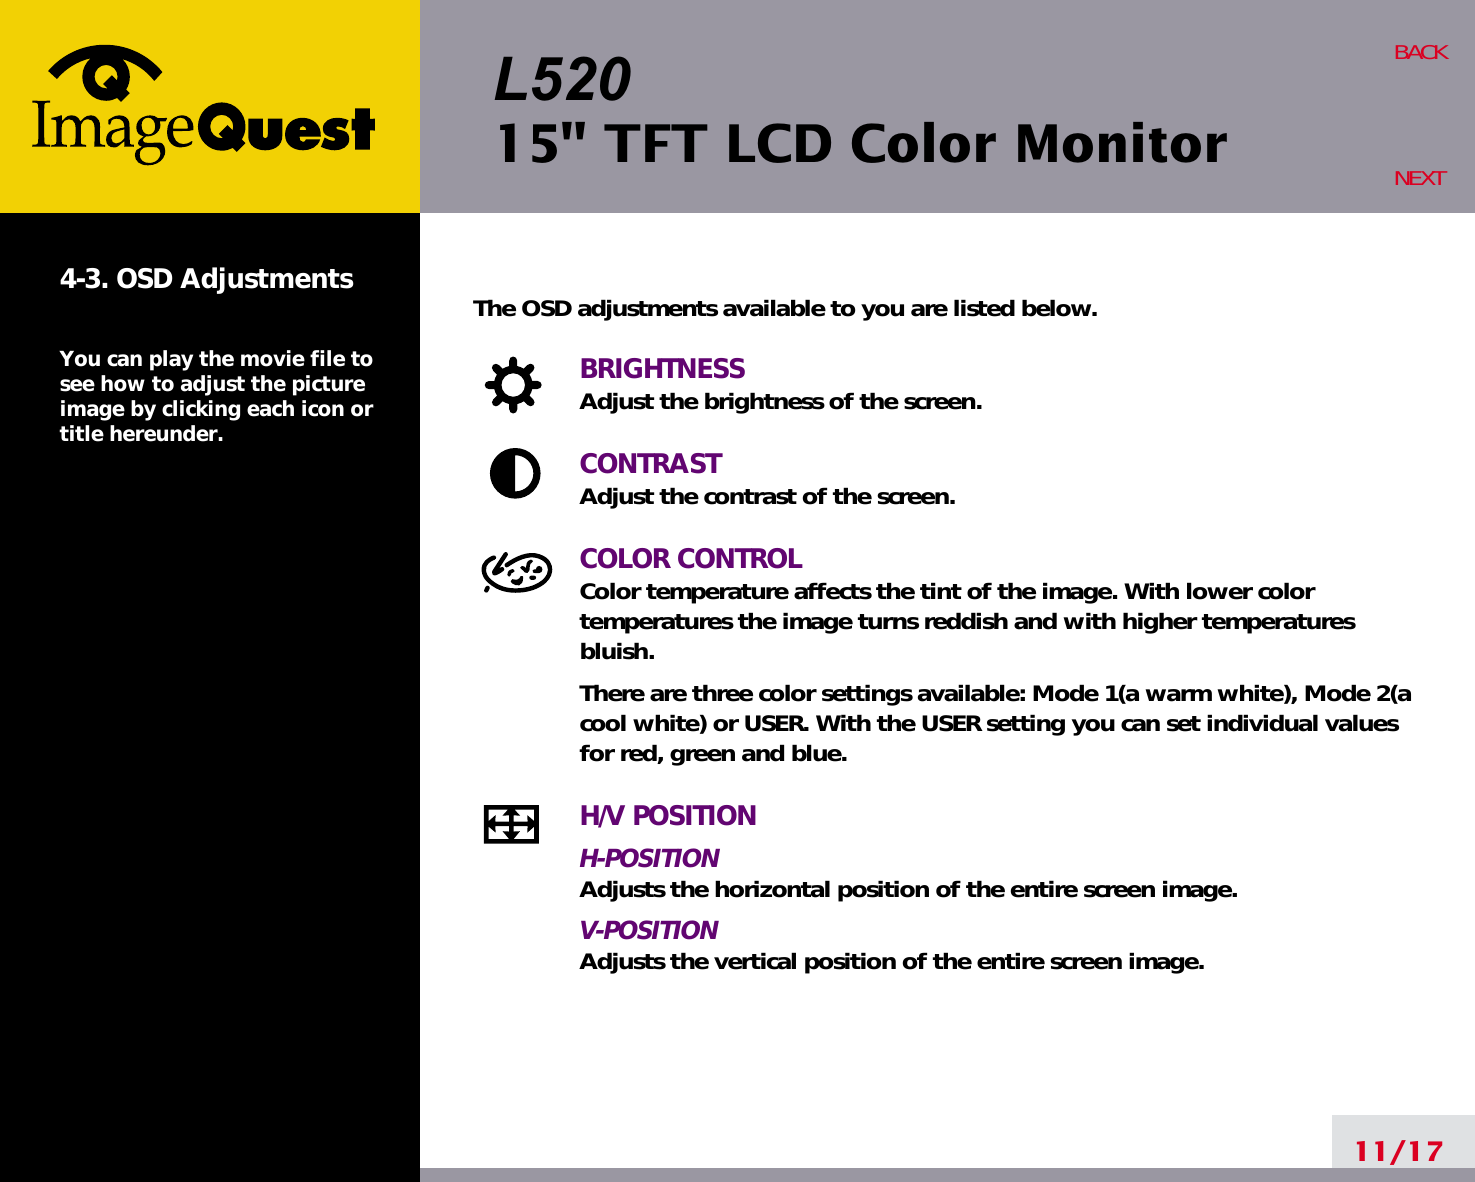 L52015&quot; TFT LCD Color Monitor11/17BACKNEXT4-3. OSD AdjustmentsYou can play the movie file tosee how to adjust the pictureimage by clicking each icon ortitle hereunder.The OSD adjustments available to you are listed below.BRIGHTNESSAdjust the brightness of the screen.CONTRASTAdjust the contrast of the screen.COLOR CONTROLColor temperature affects the tint of the image. With lower color temperatures the image turns reddish and with higher temperatures bluish.There are three color settings available: Mode 1(a warm white), Mode 2(acool white) or USER. With the USER setting you can set individual valuesfor red, green and blue.H/V POSITIONH-POSITIONAdjusts the horizontal position of the entire screen image.V-POSITIONAdjusts the vertical position of the entire screen image.